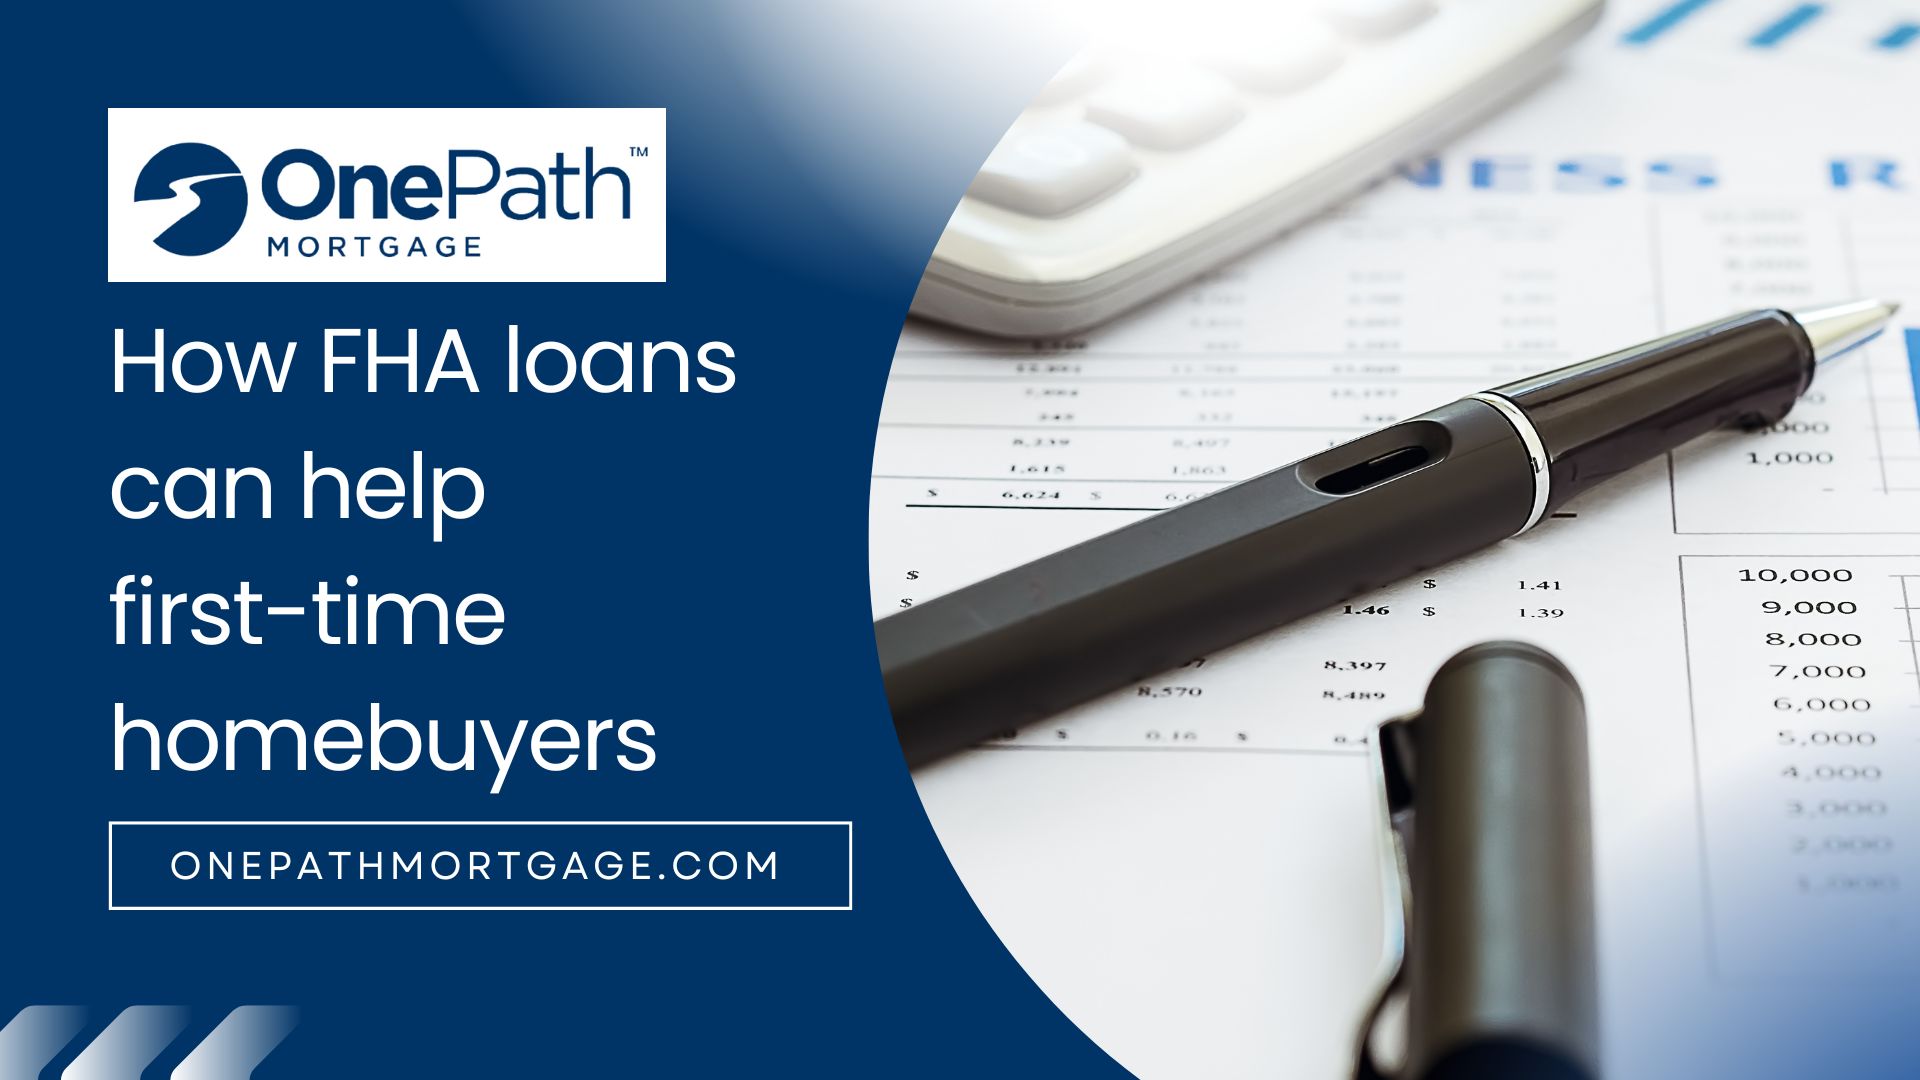 How FHA loans can help first-time homebuyers